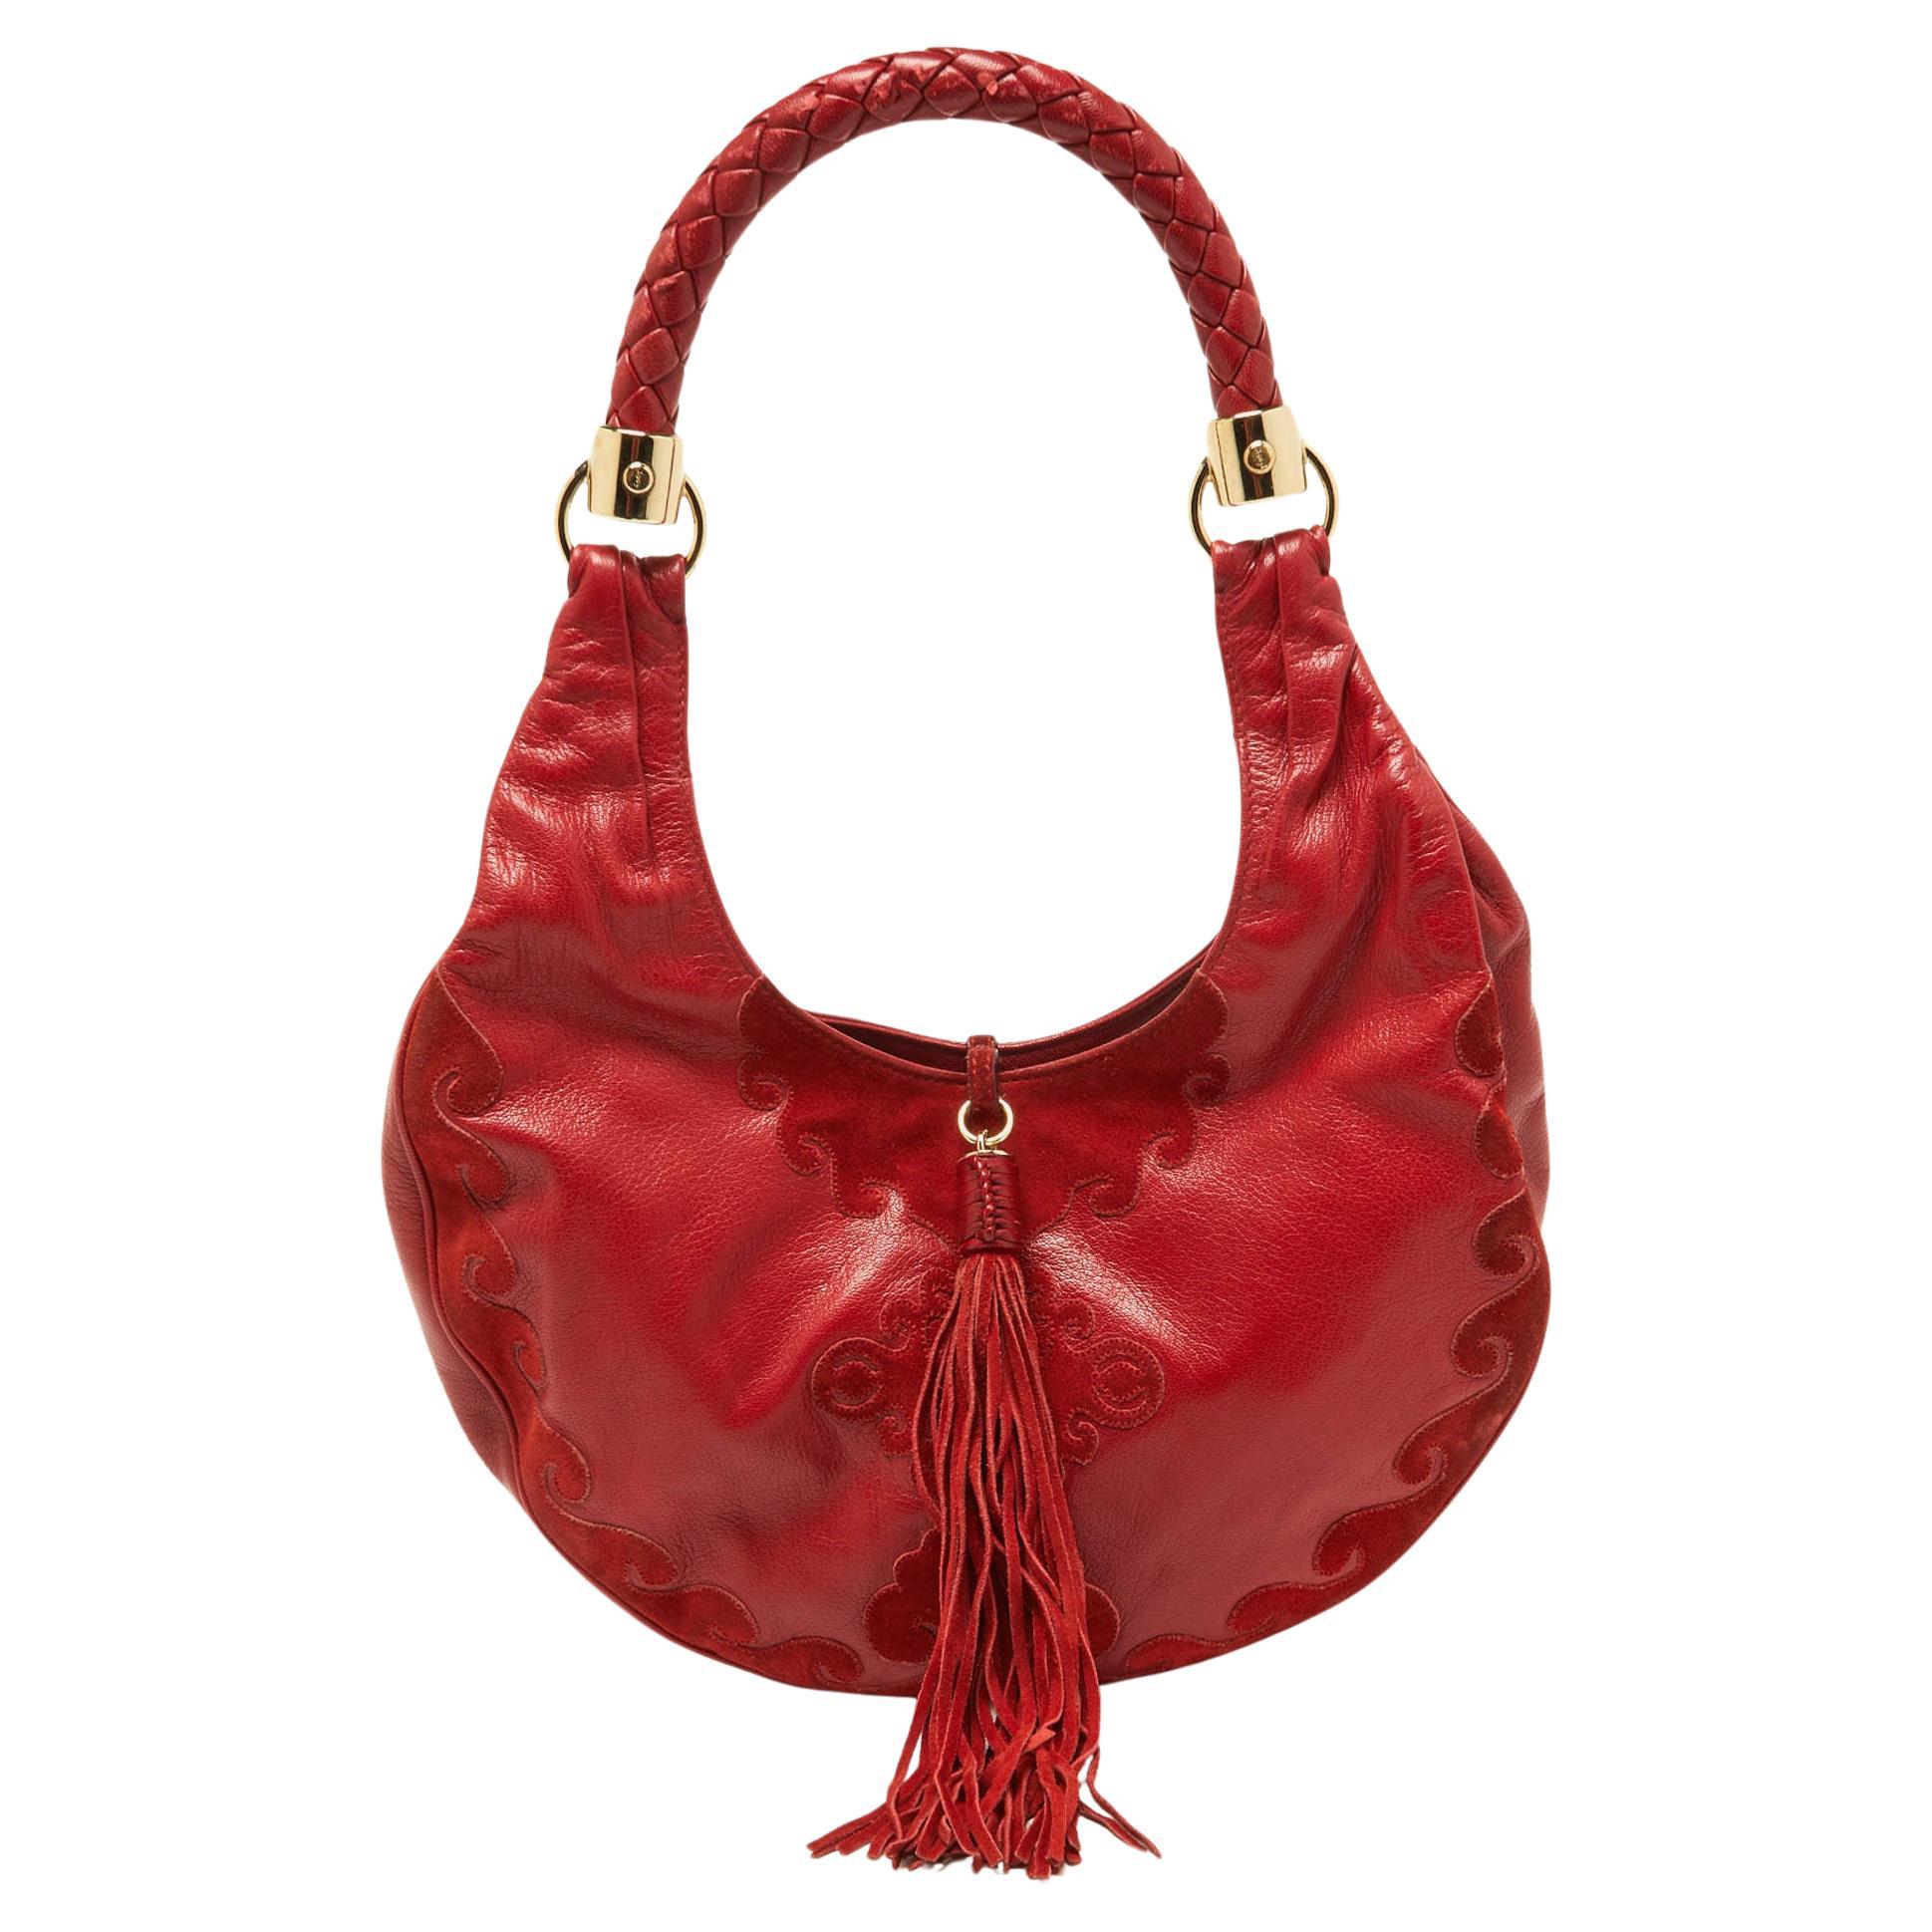 Yves Saint Laurent Red Suede and Leather Trim Tassel Hobo